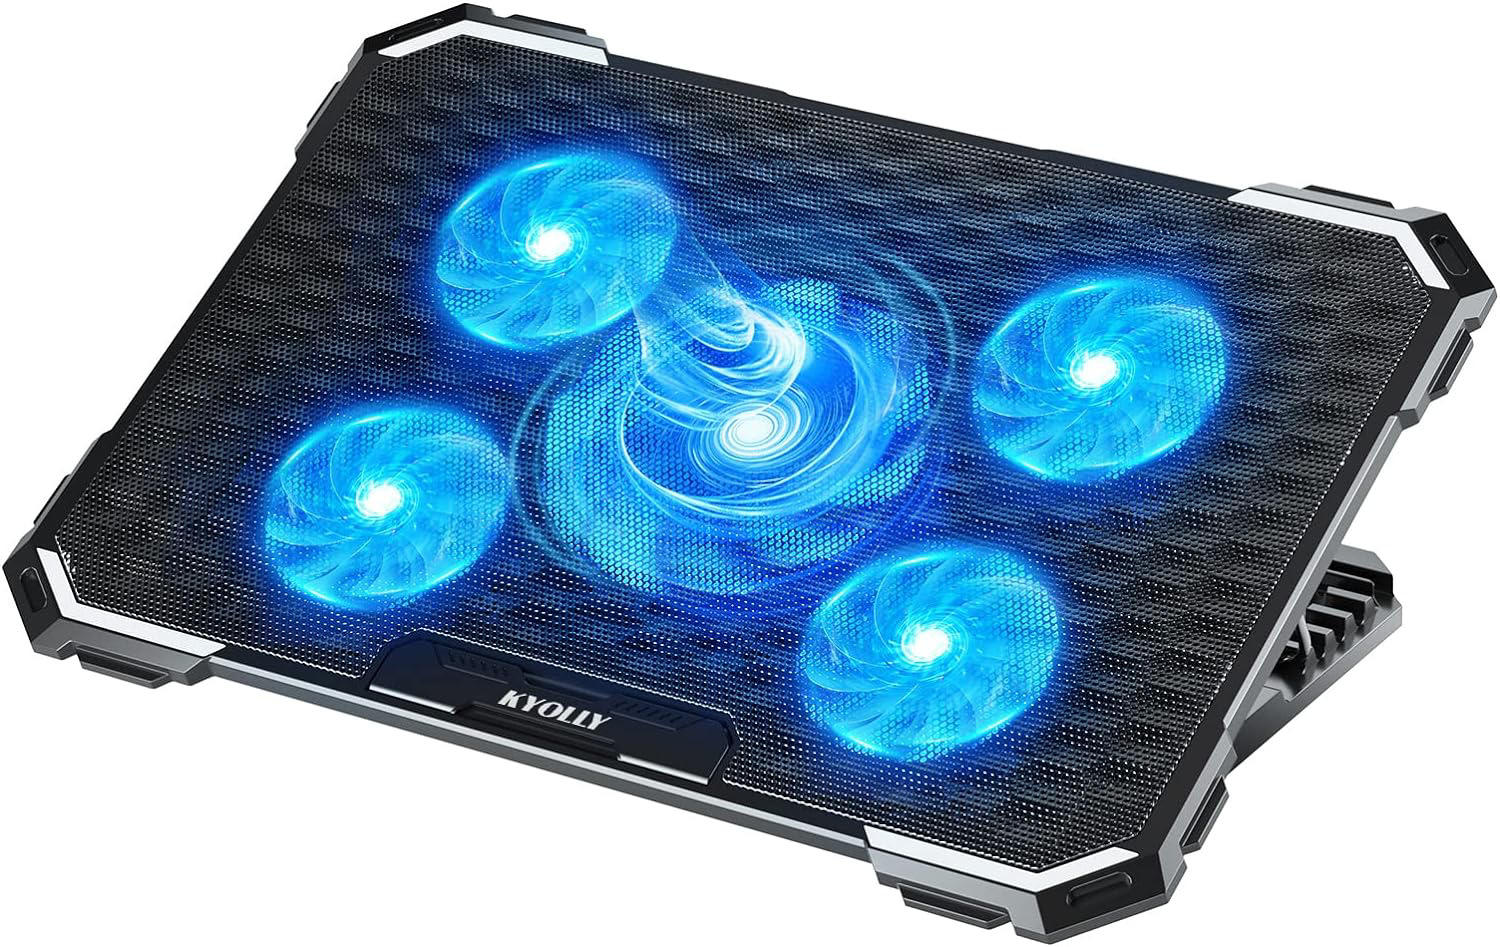 KYOLLY Upgrade Laptop Cooling Pad,Gaming Laptop Cooler with 5 Quiet Fans,2 USB